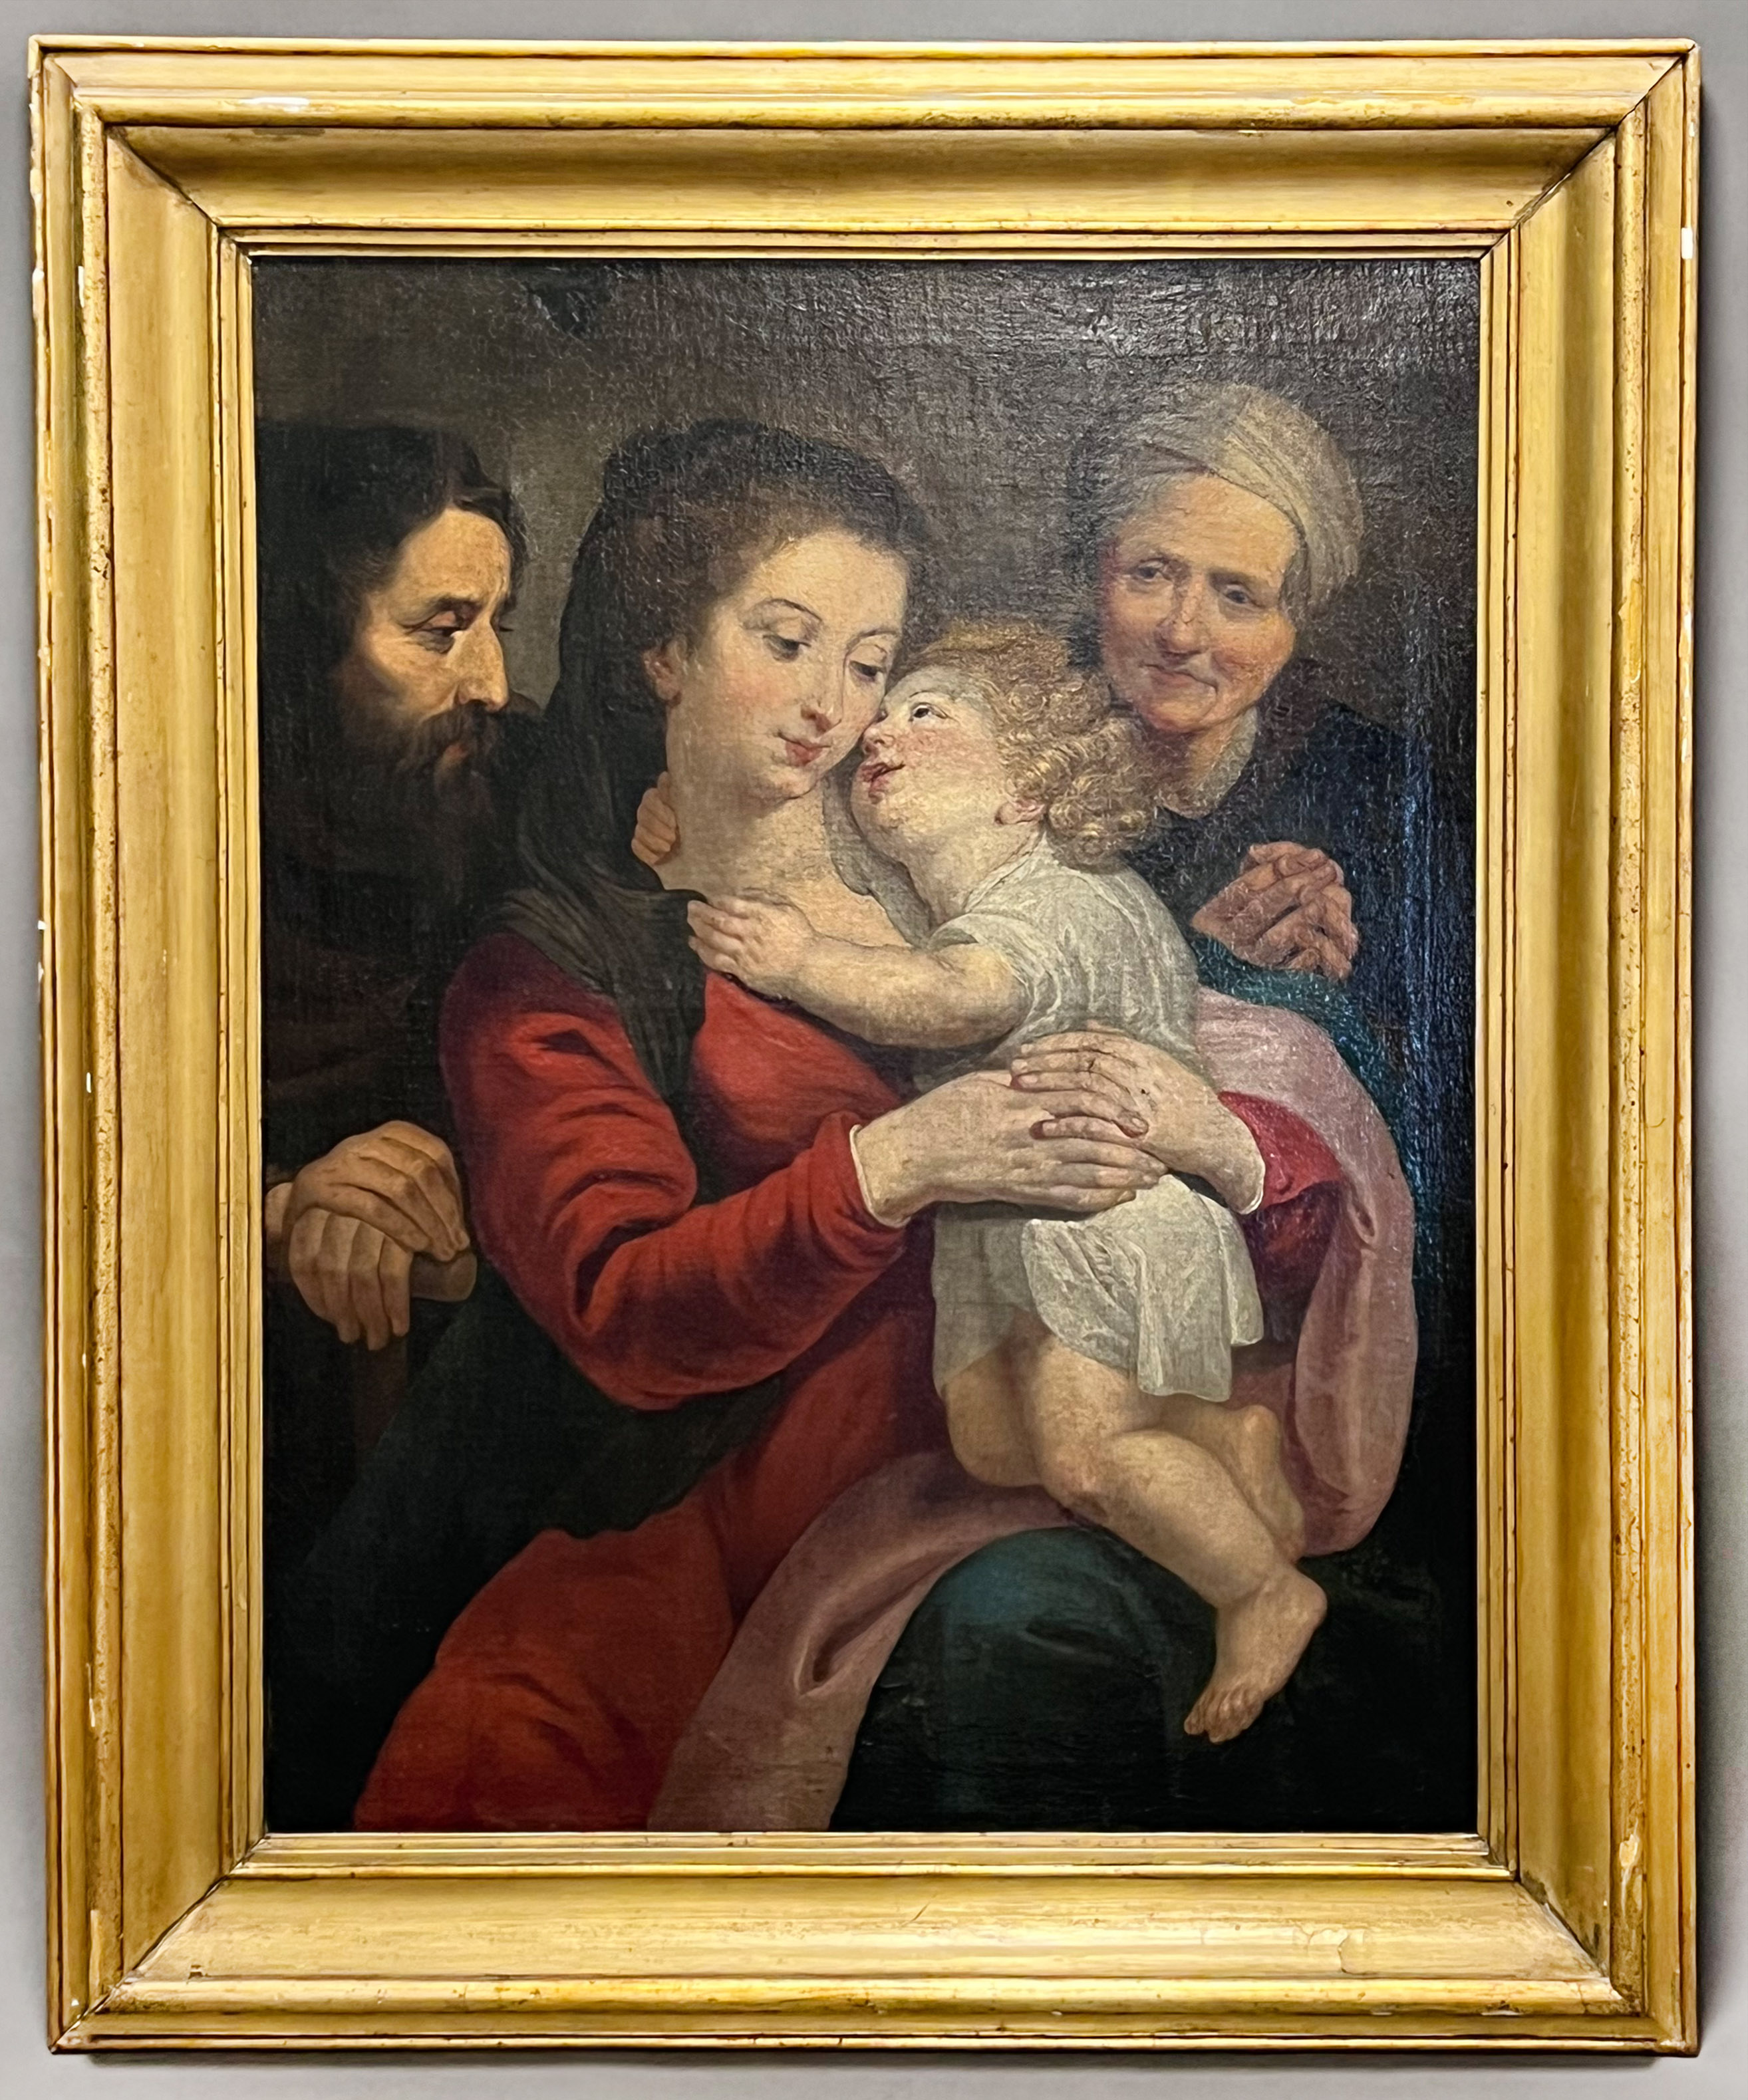 Peter Paul Rubens (1577 - 1640) Copy after. "The Holy Family with St Anne". - Image 2 of 19